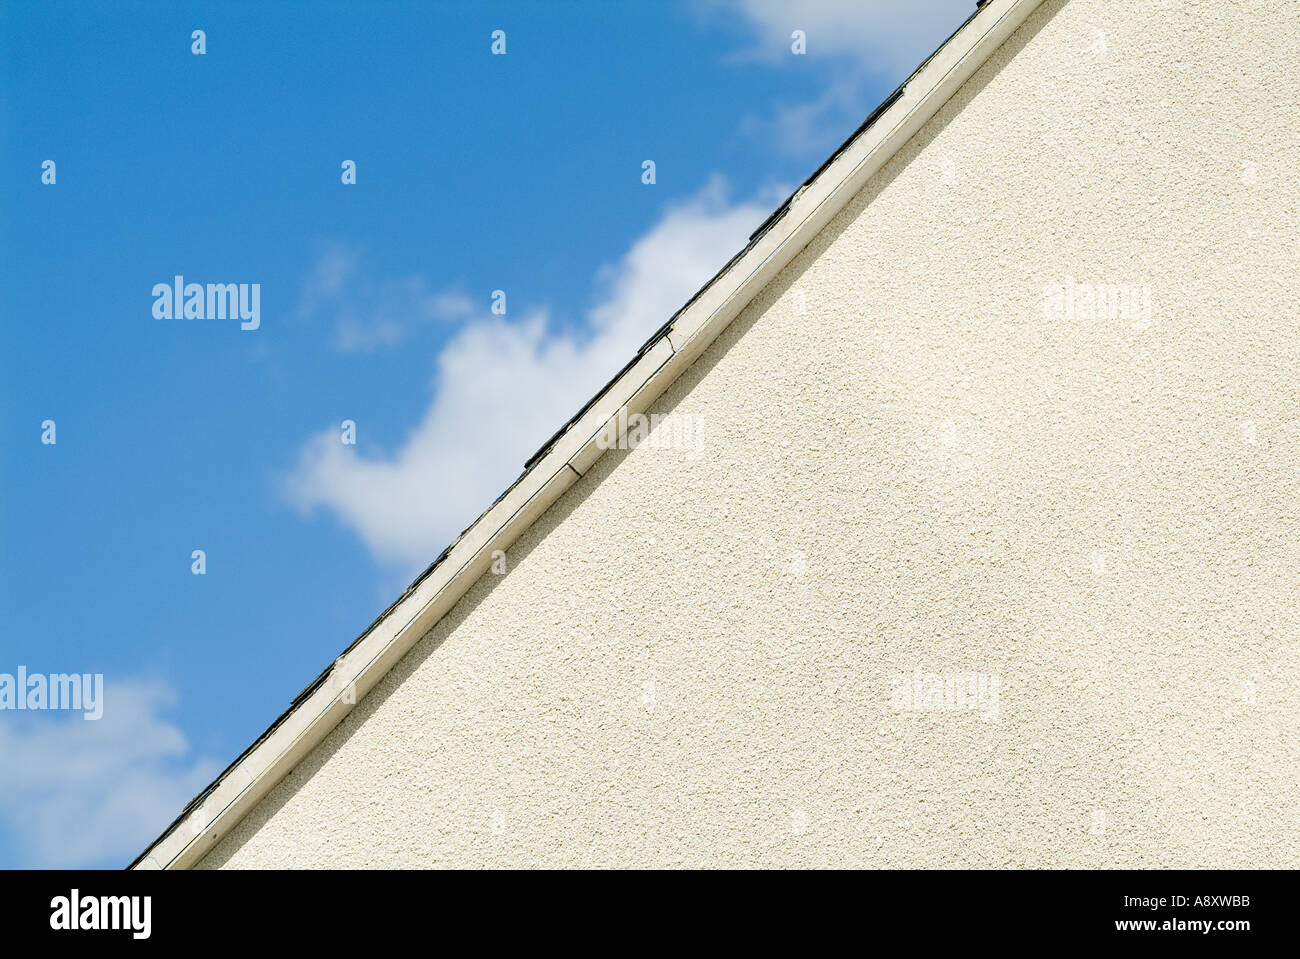 Front apex of building showing white pebble dashing, rendering, and blue sky Stock Photo